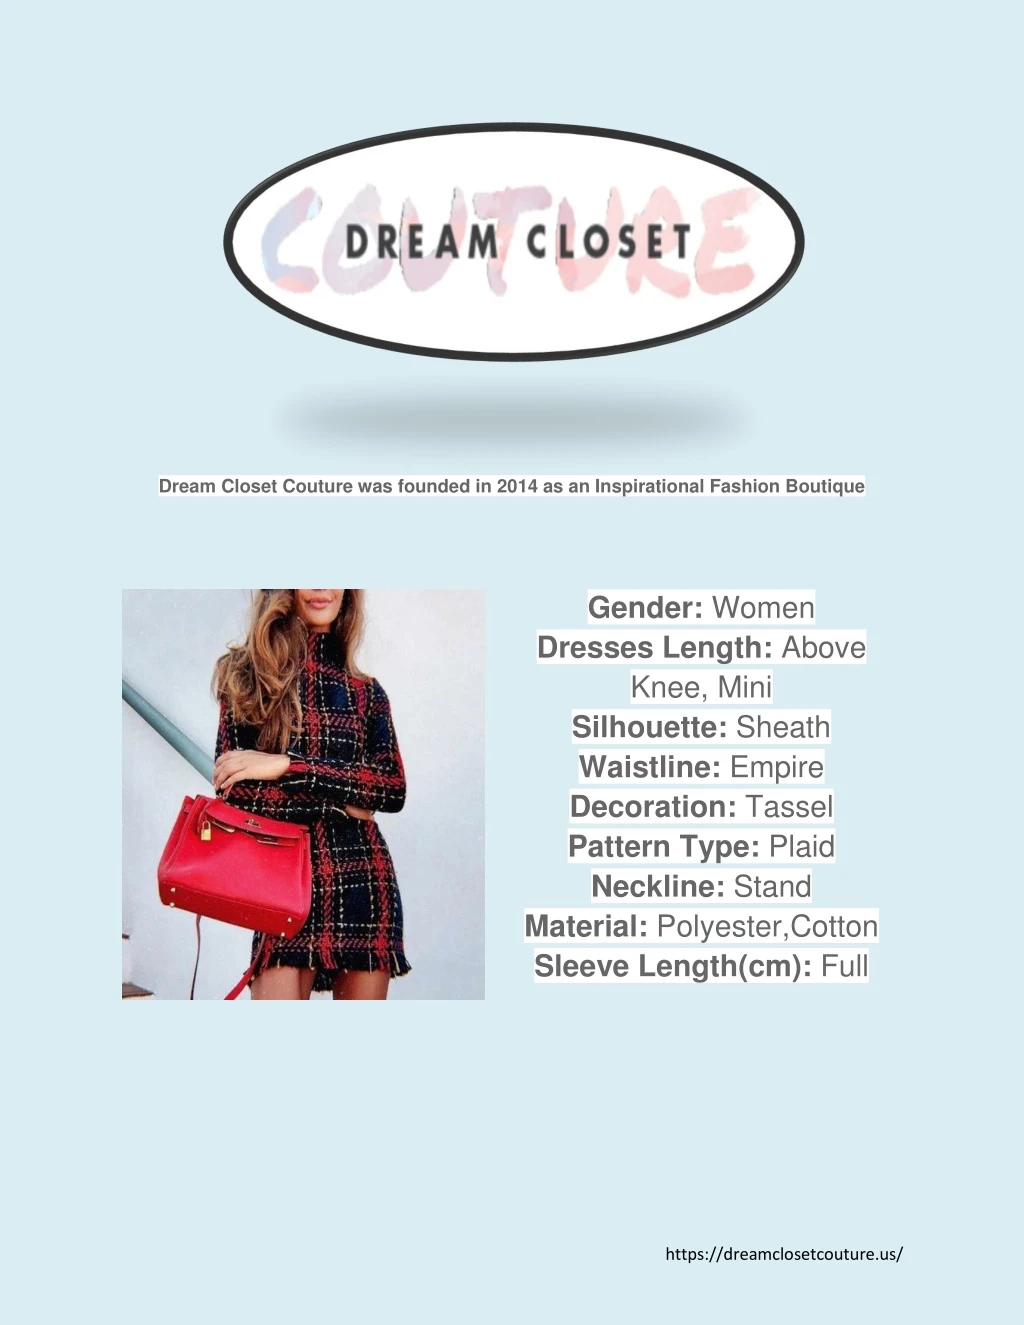 dream closet couture was founded in 2014 n.